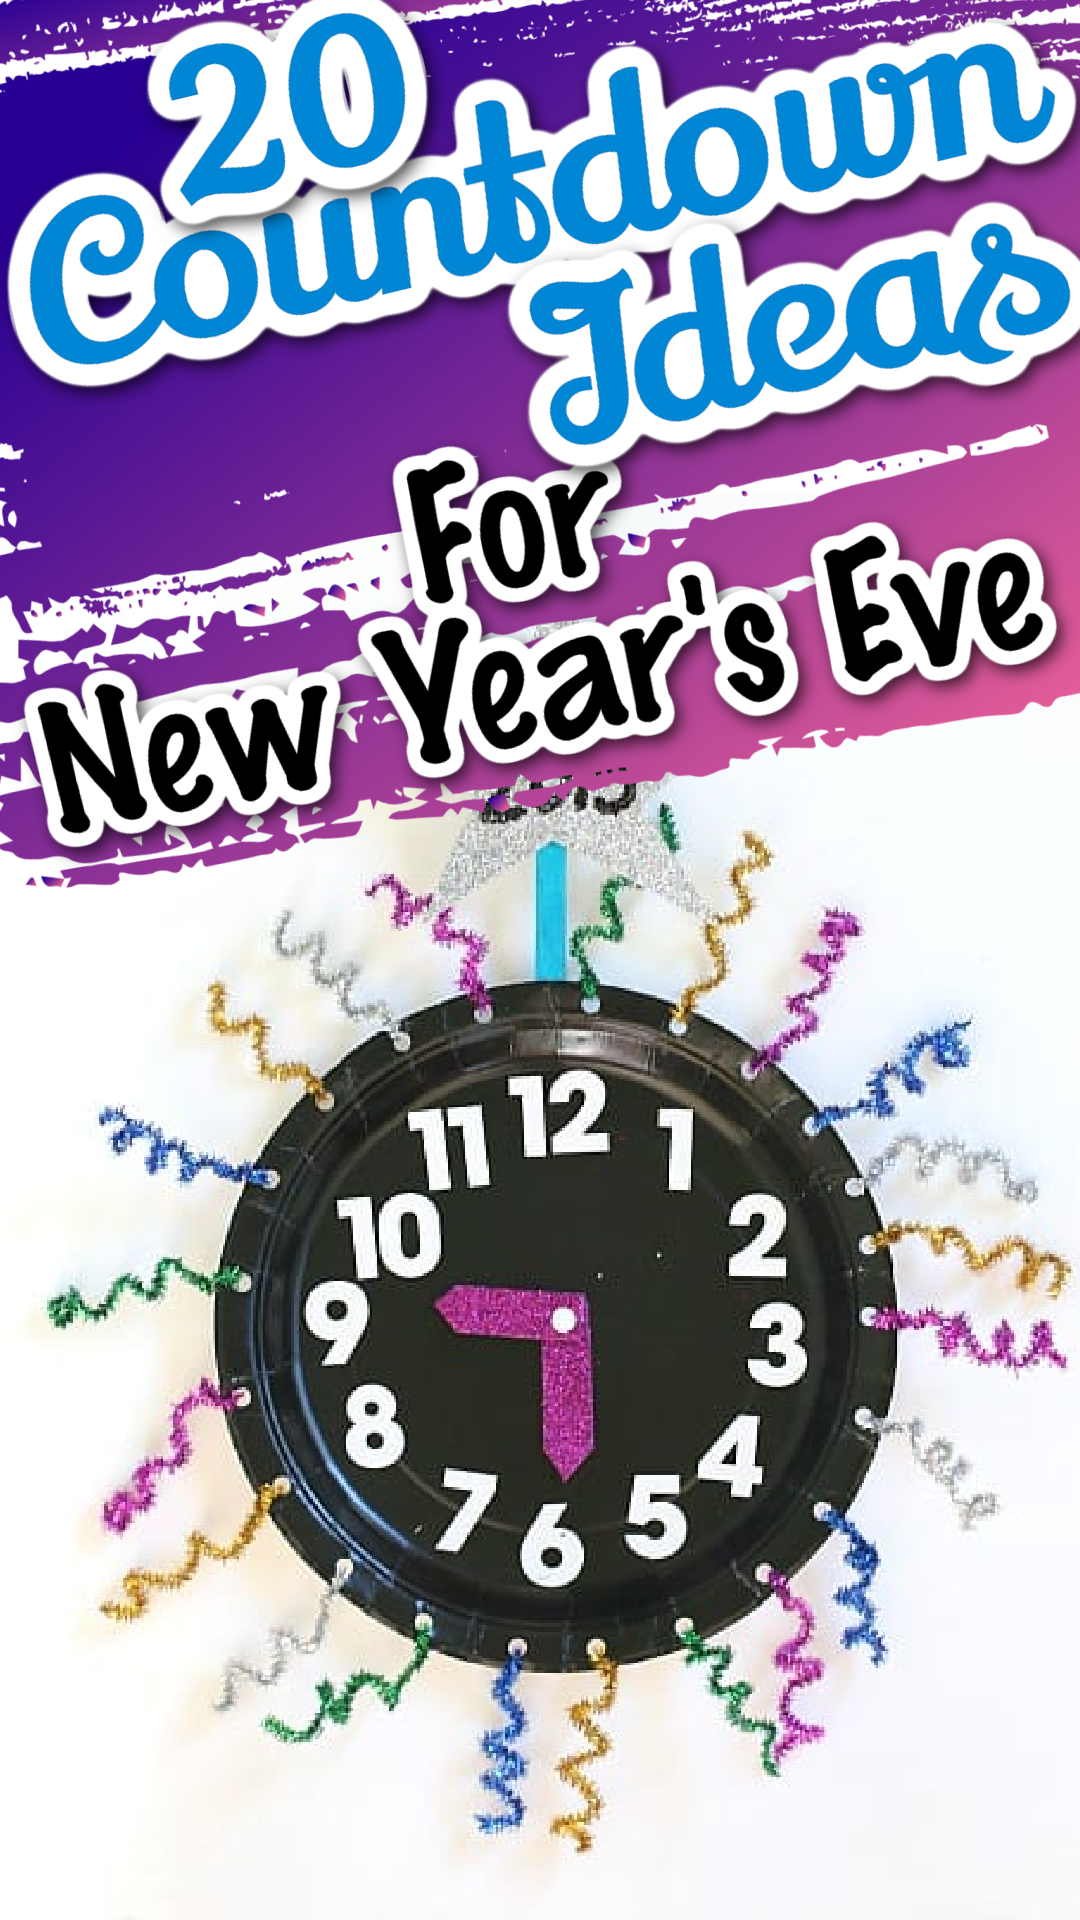 pin image with a did clock countdown for New Year's Eve.